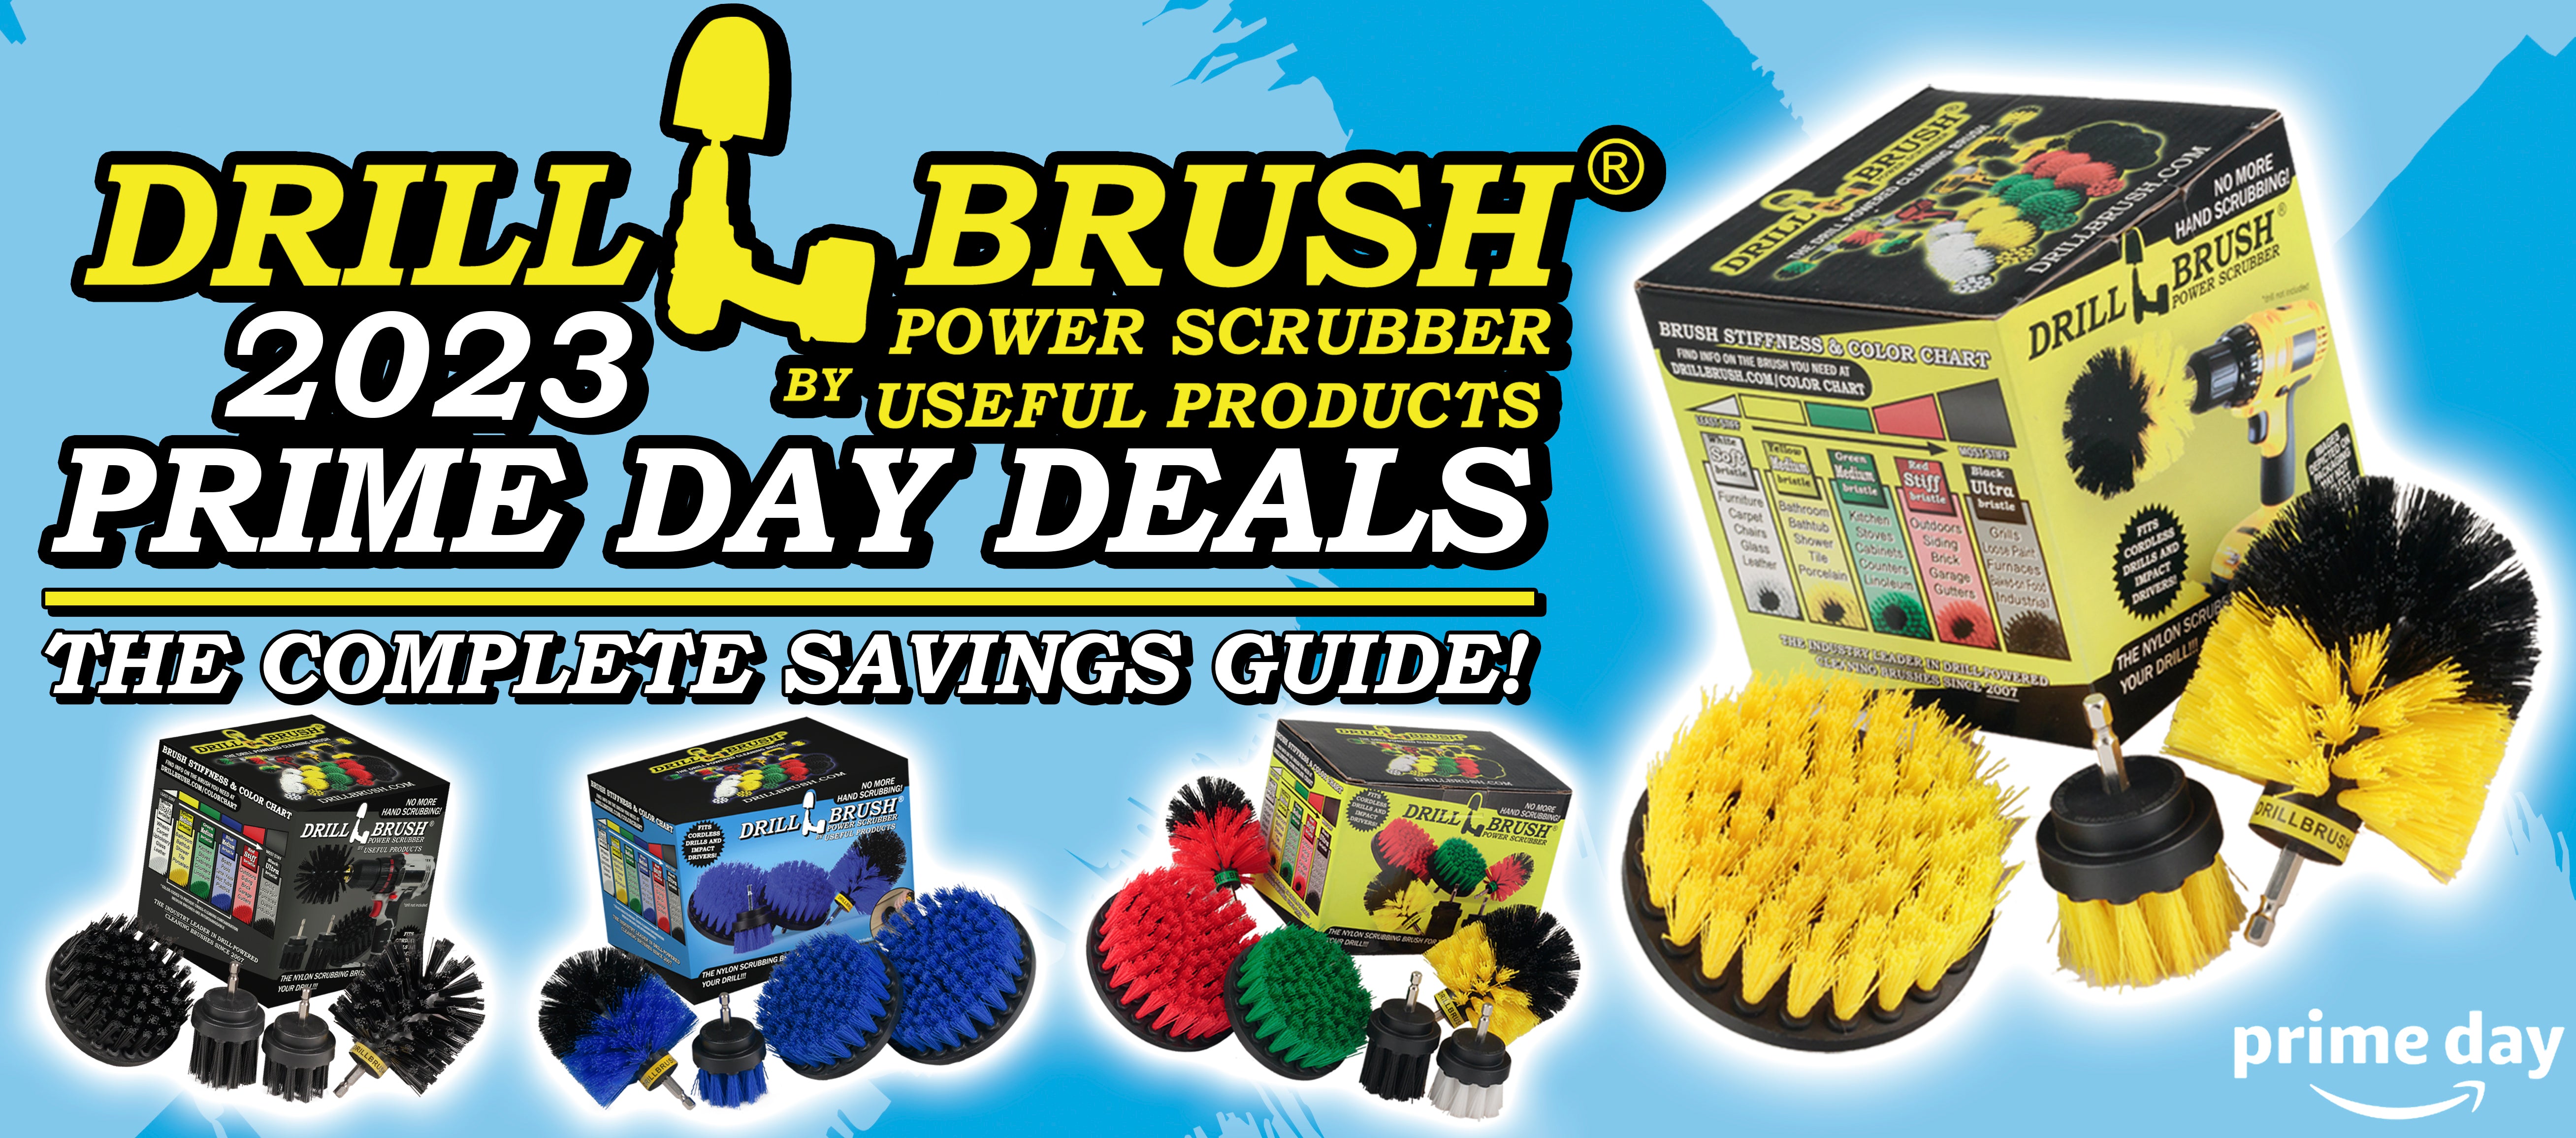 All Must-Have Deals On Drillbrush Products - Amazon Prime Day 2023